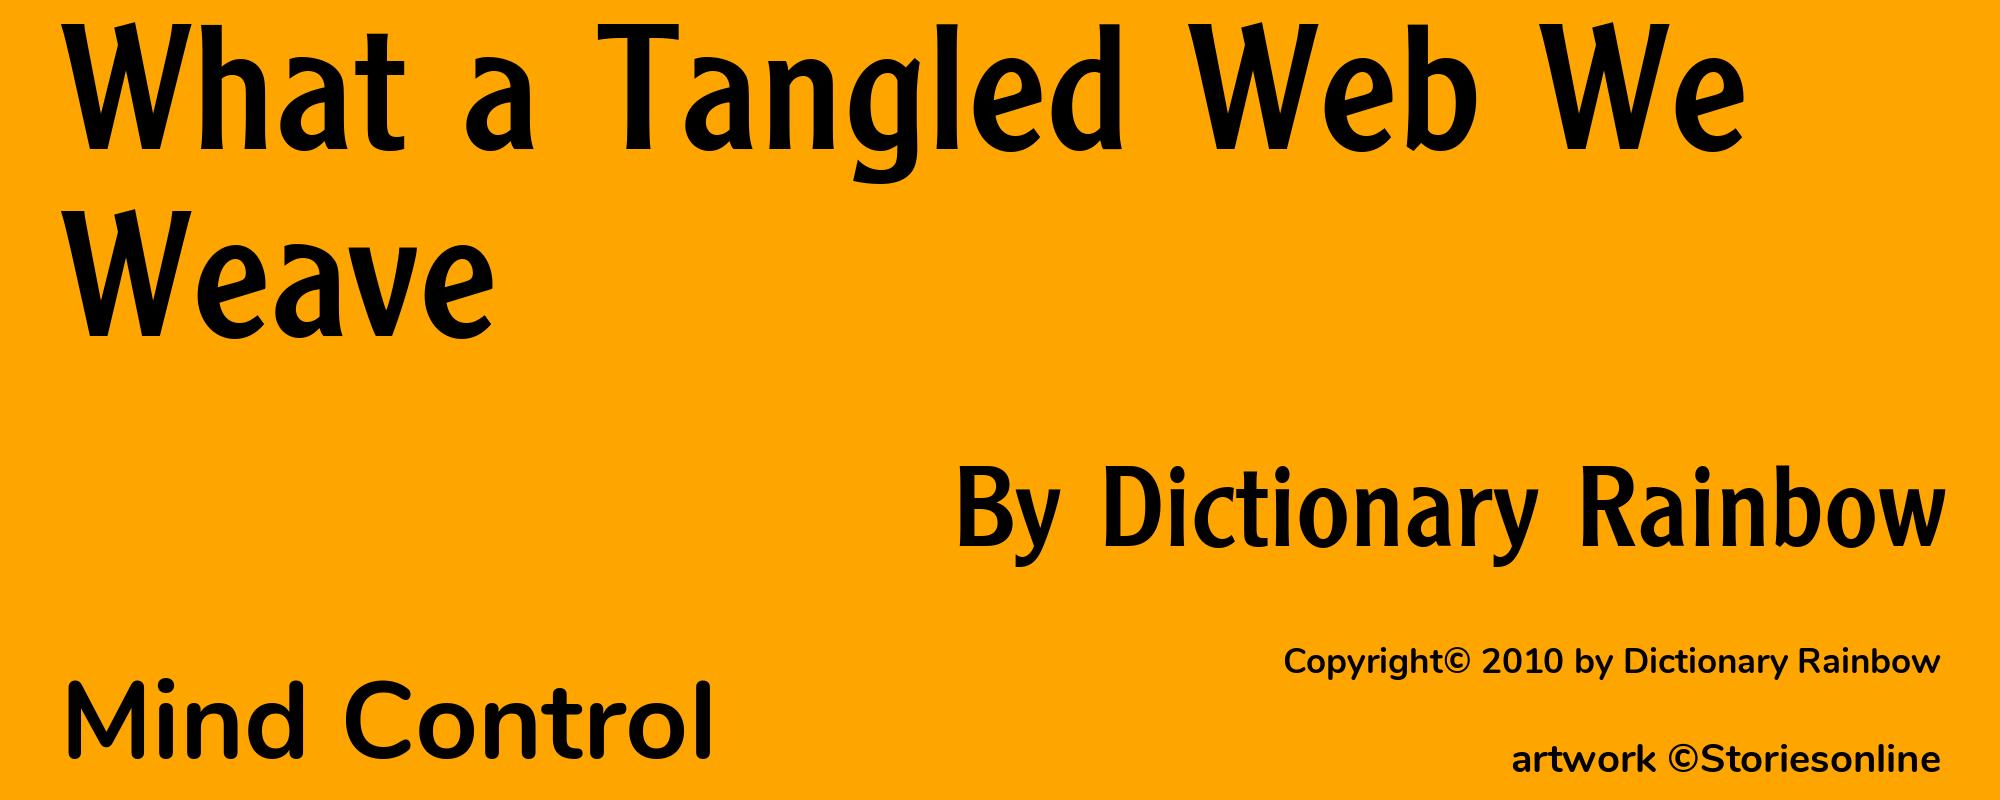 What a Tangled Web We Weave - Cover